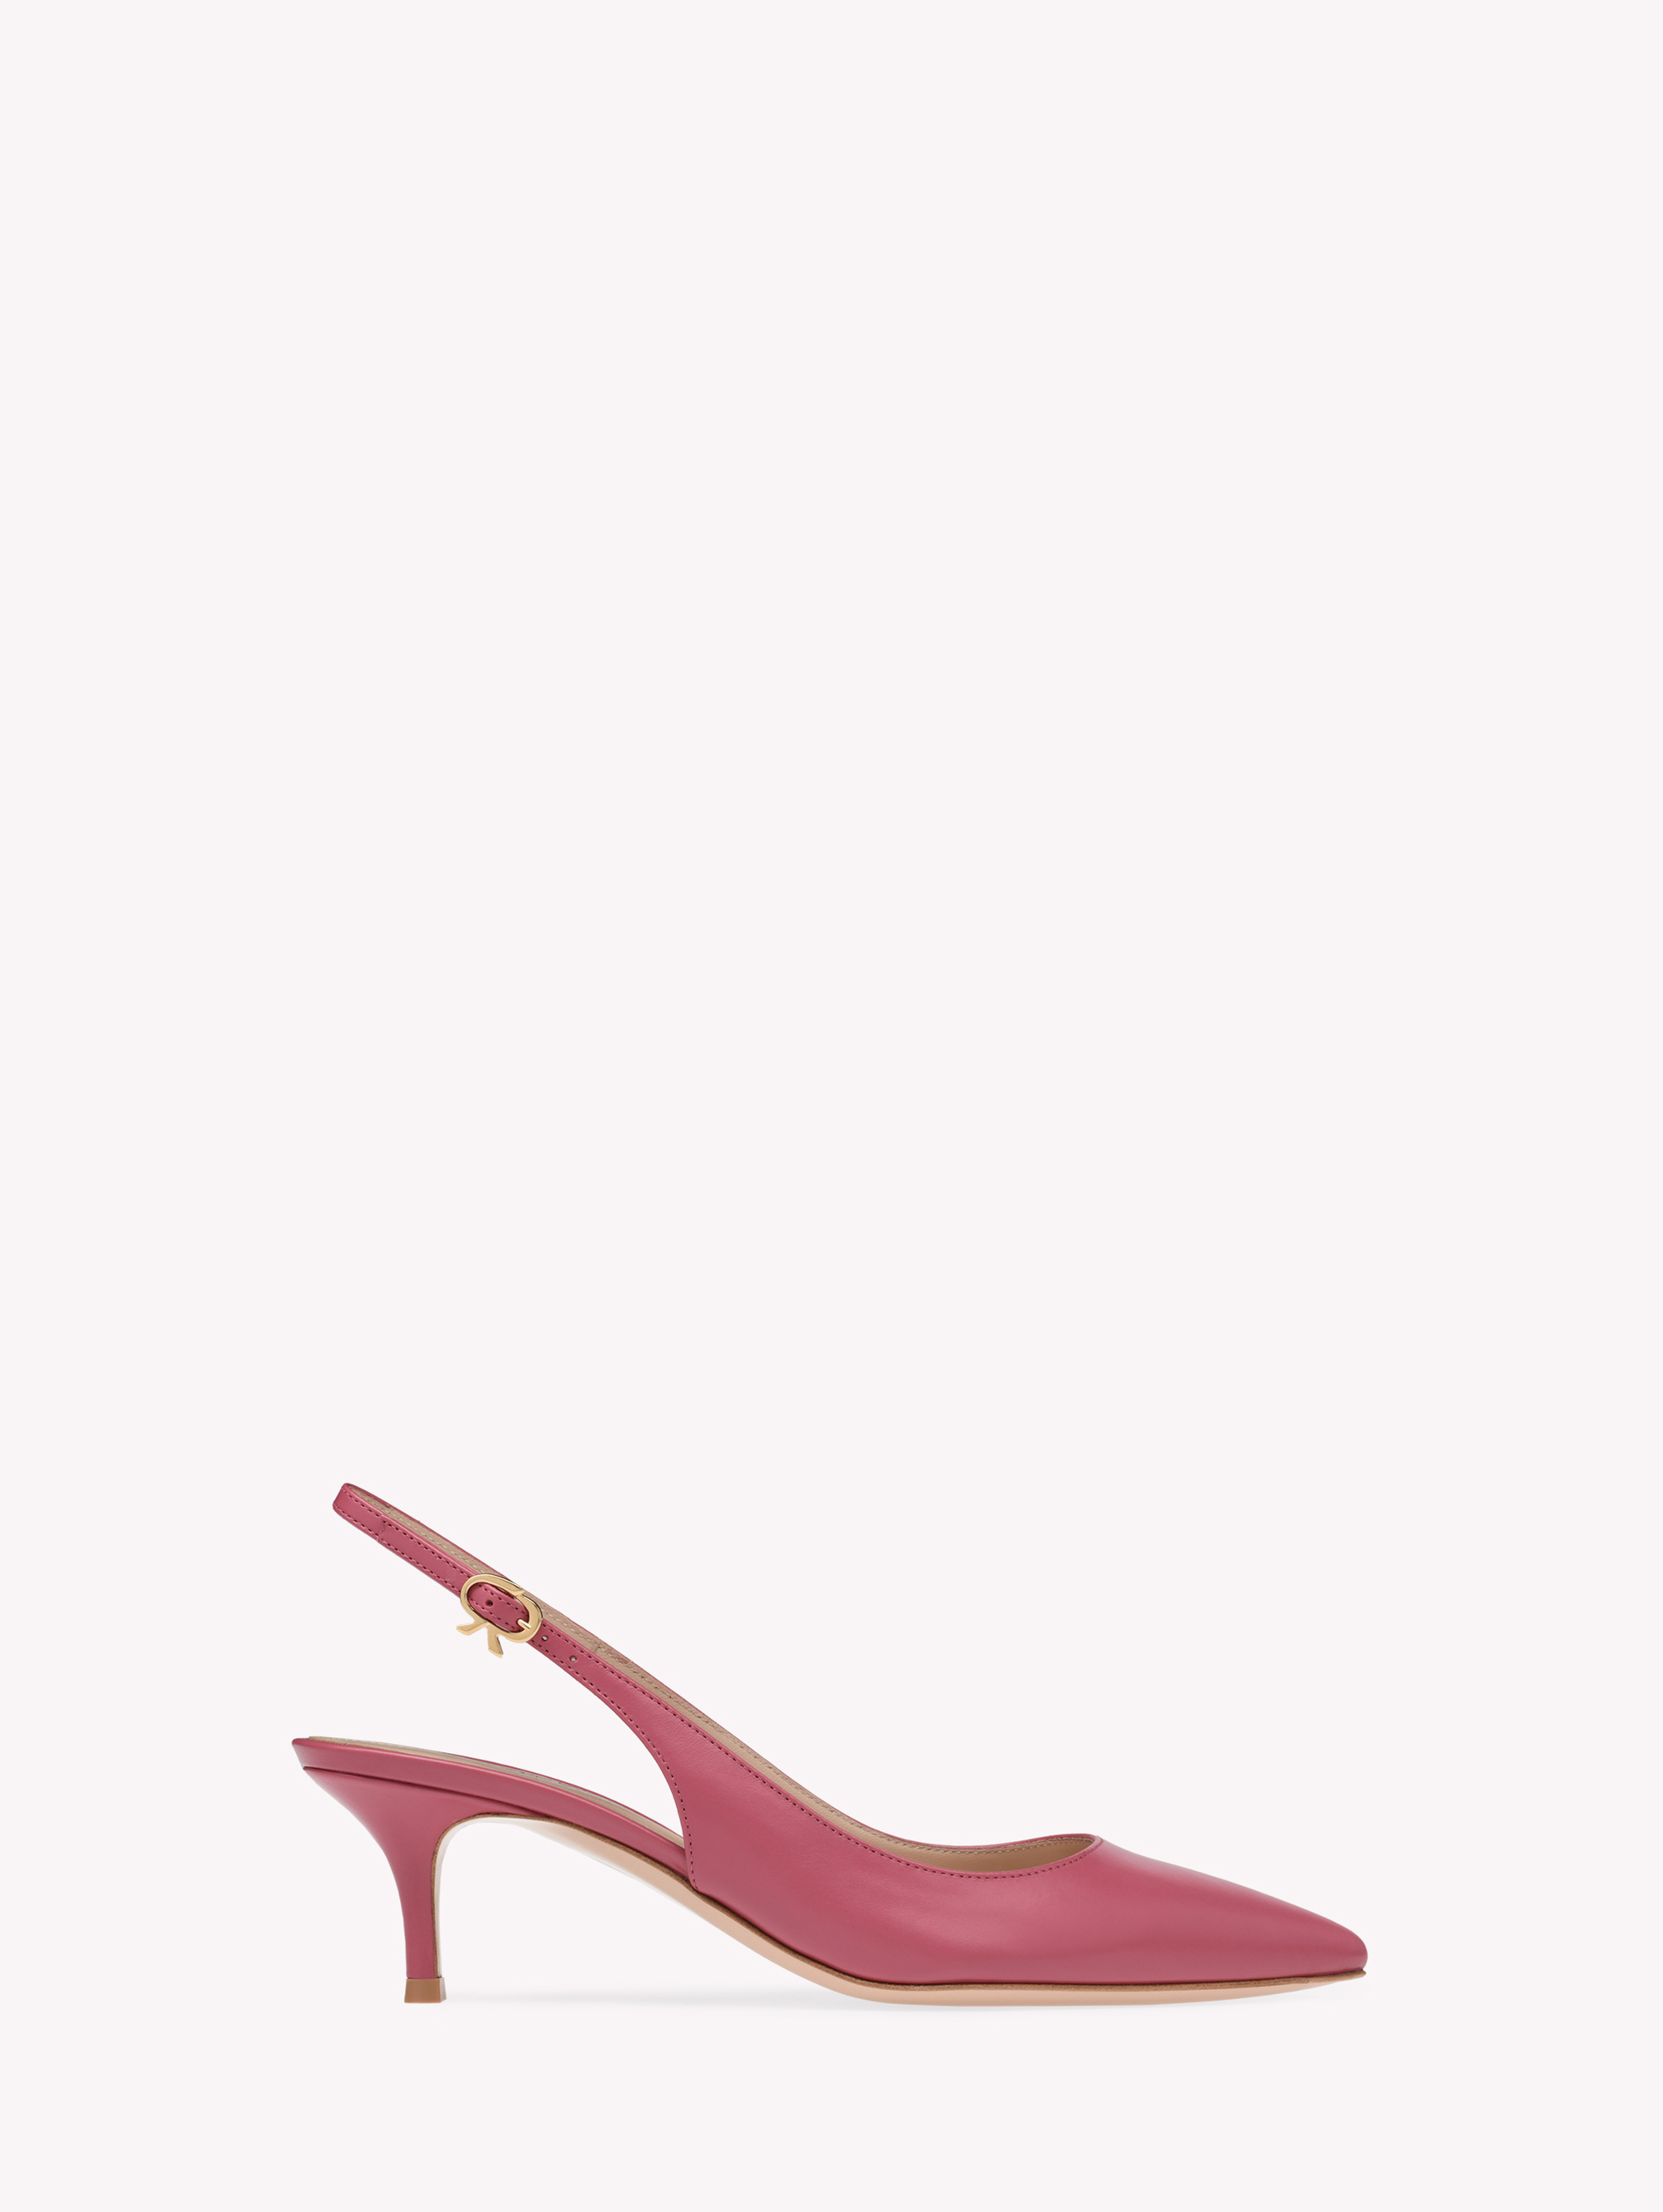 Buy RIBBON SLING for USD 477.00 | Gianvito Rossi United States